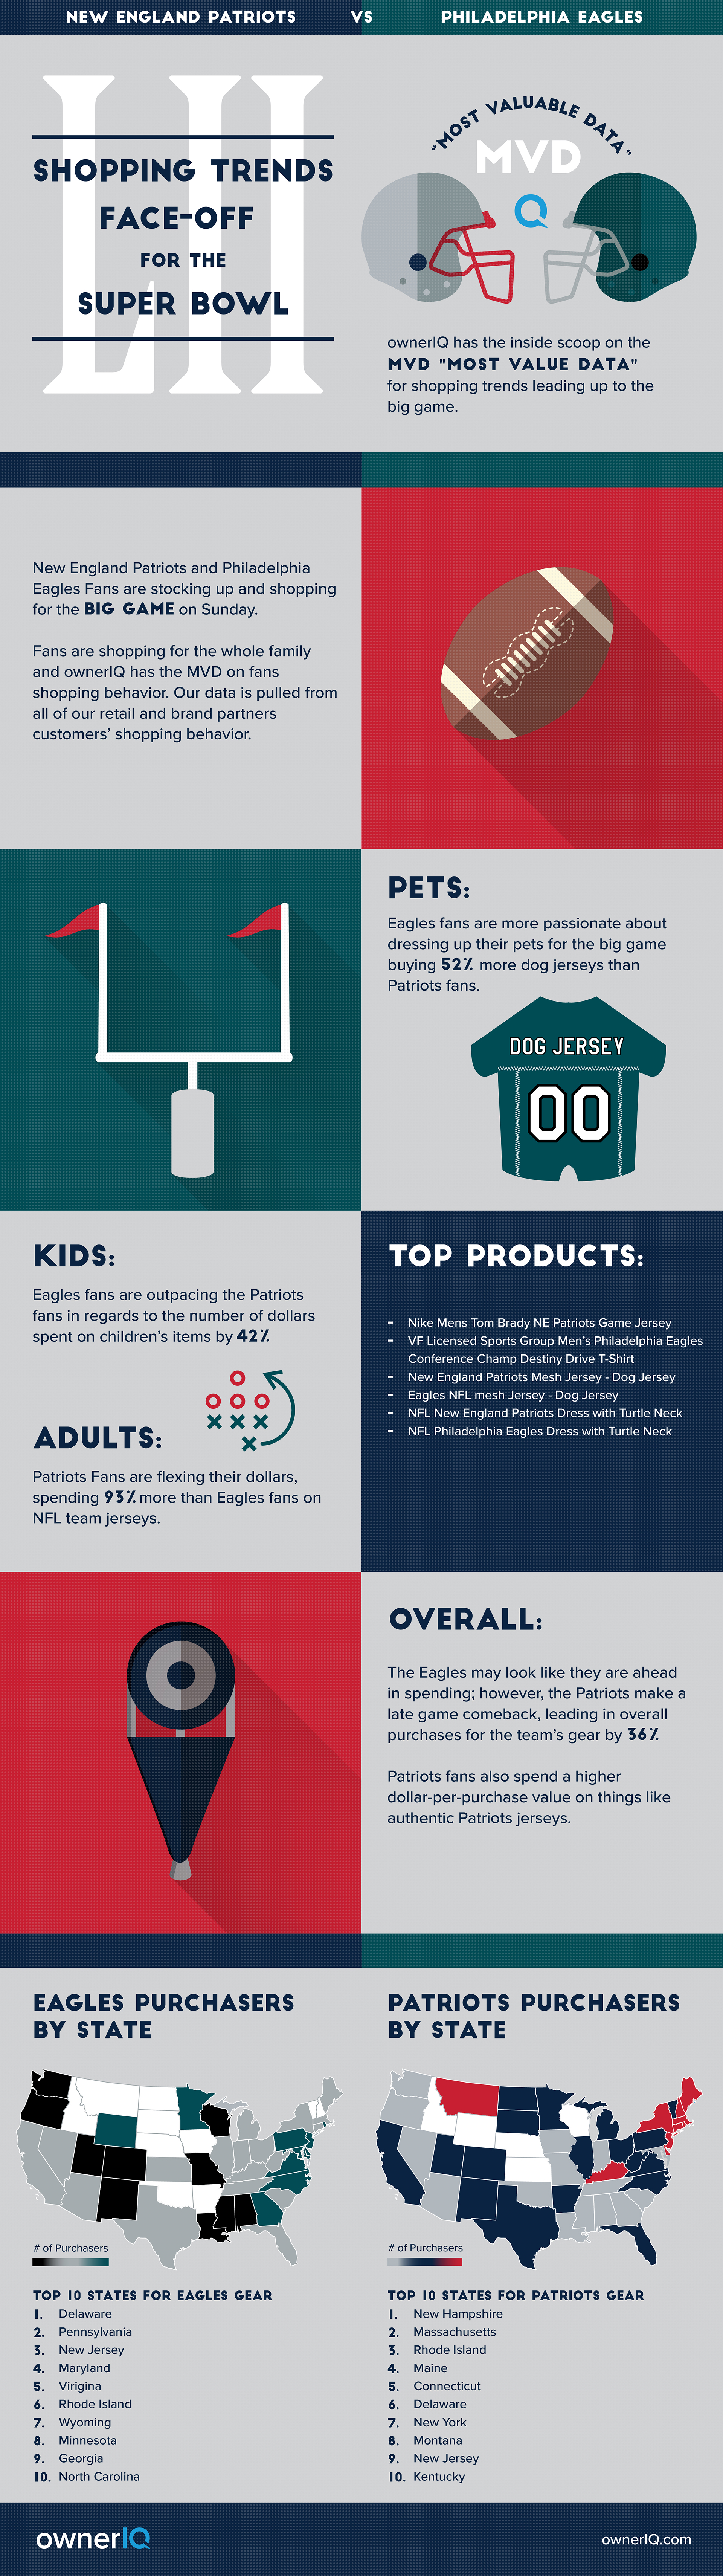 ownerIQ's Data Insights: Shopping Trends Face-off for the Super Bowl